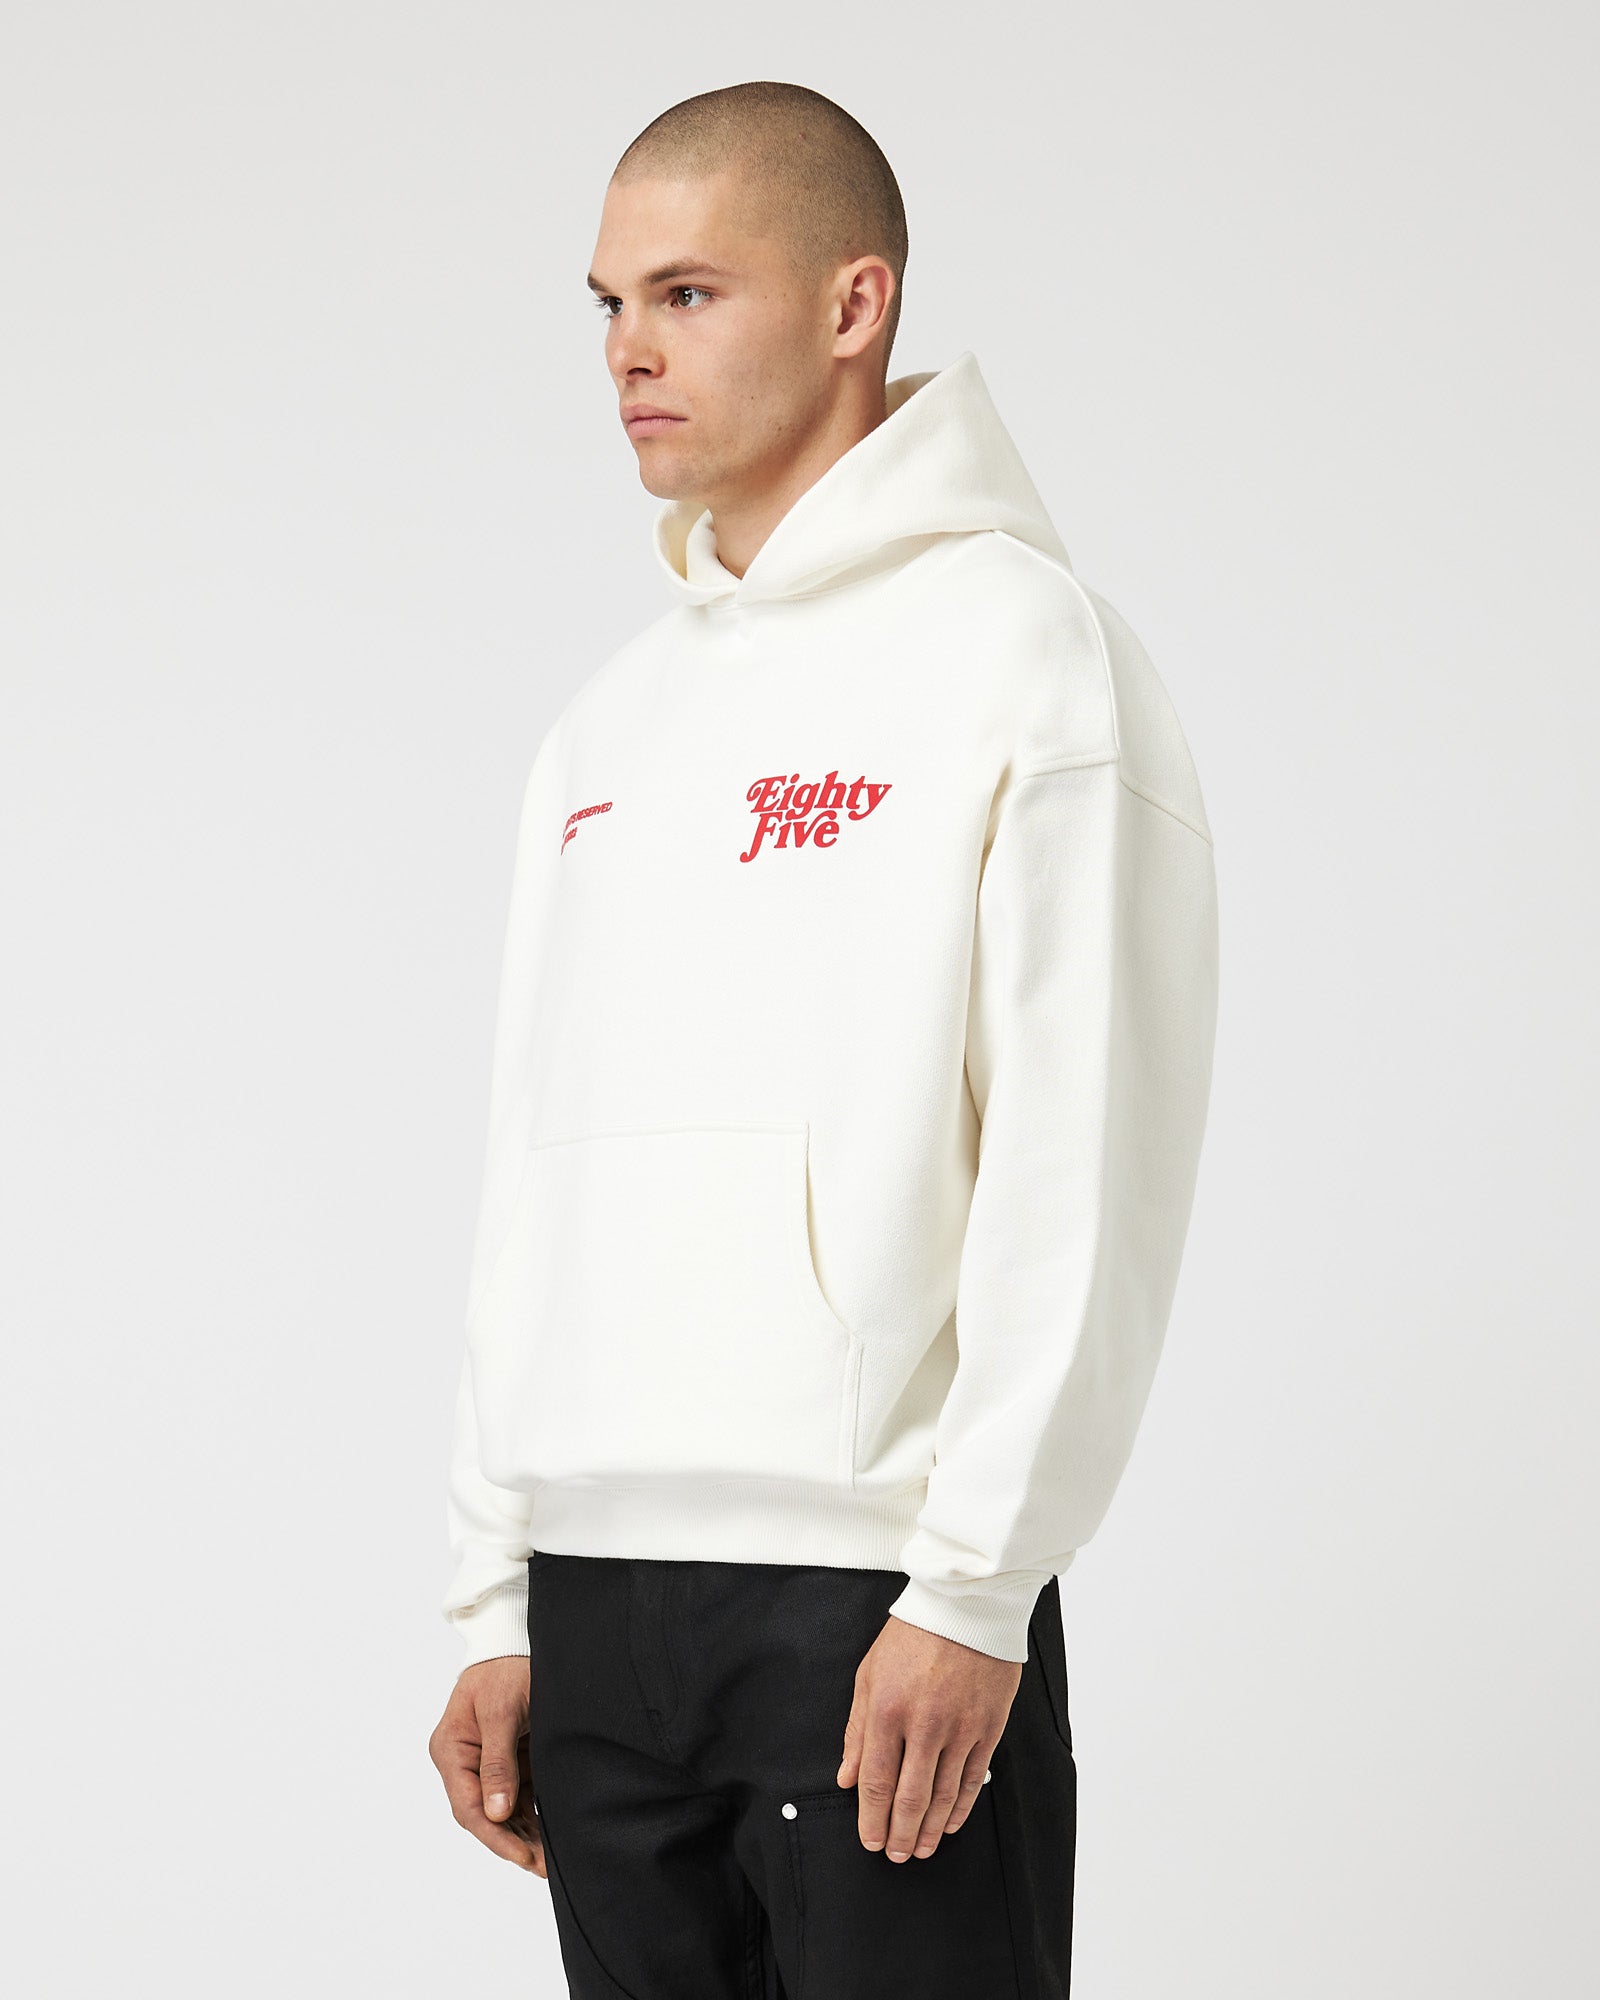 Heavy All Rights Hoodie